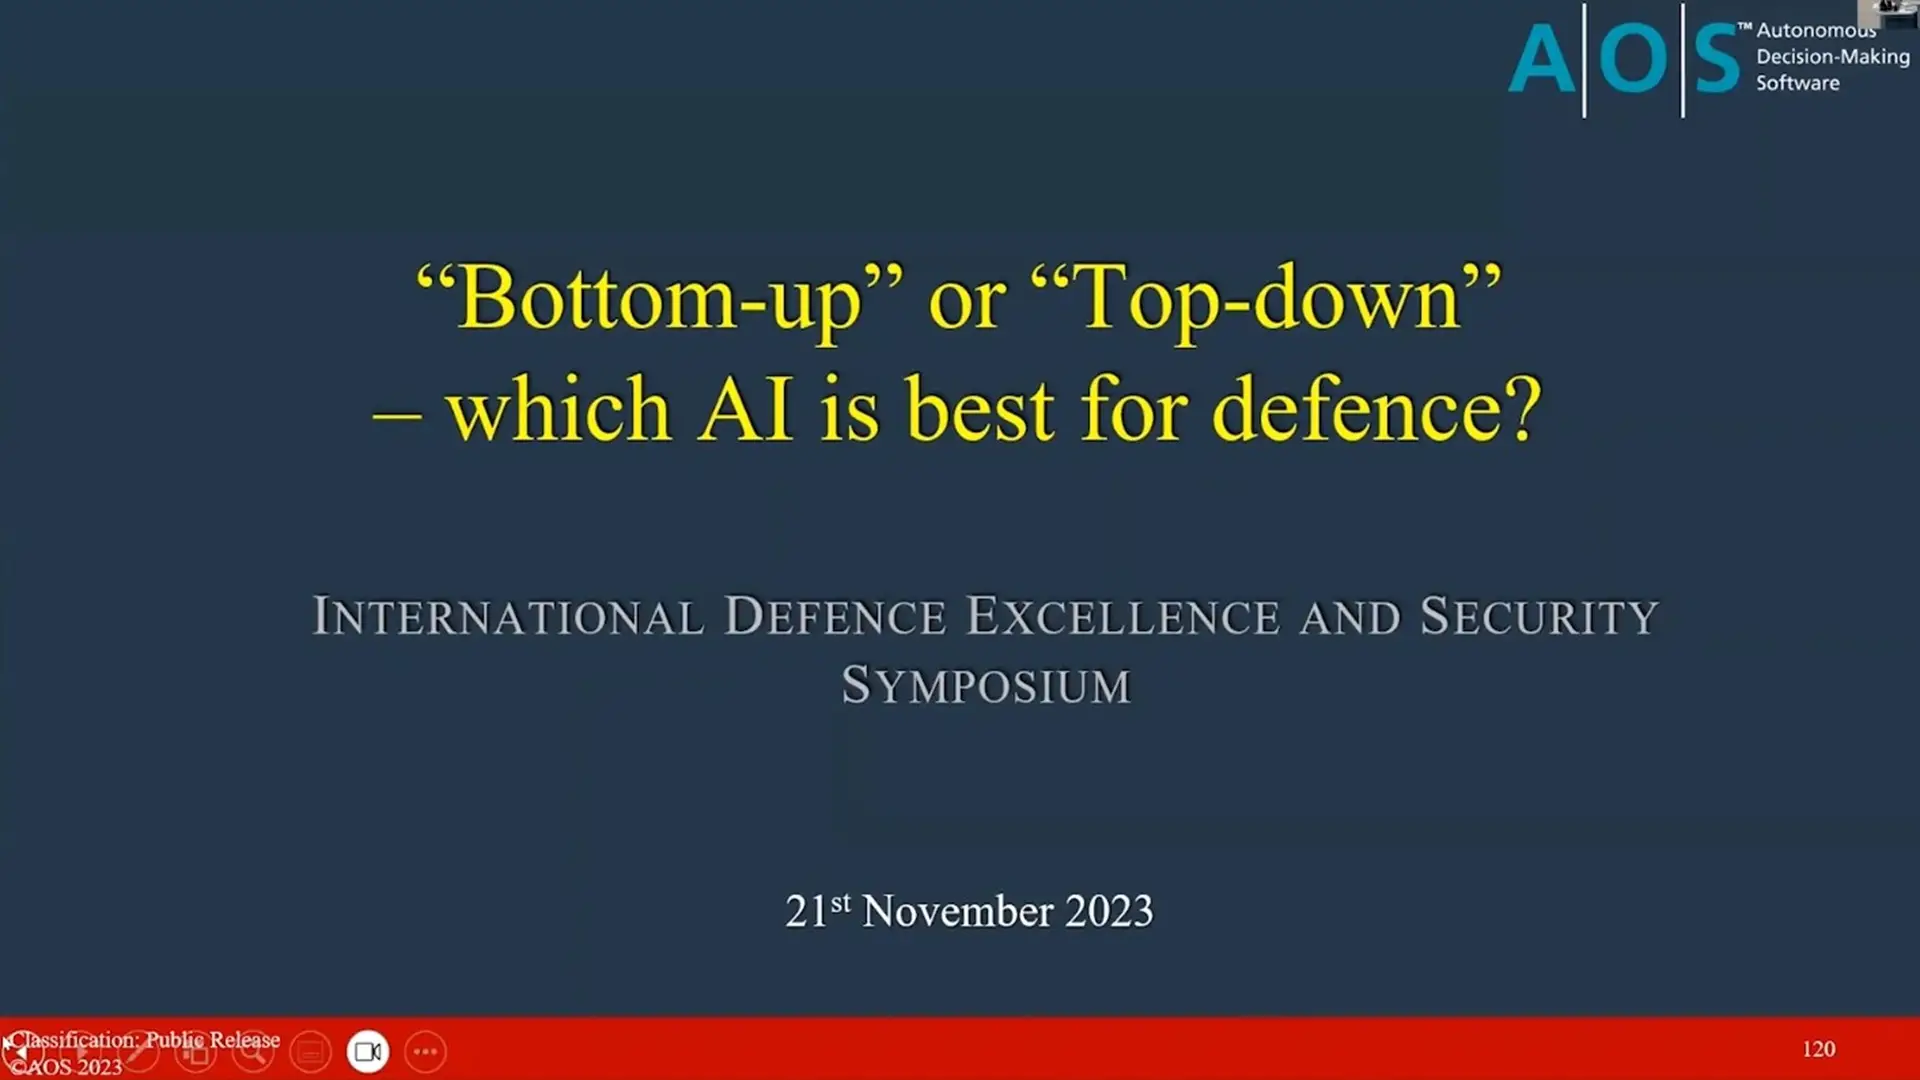 Bottom-Up or Top-Down Which AI is Best for Defence